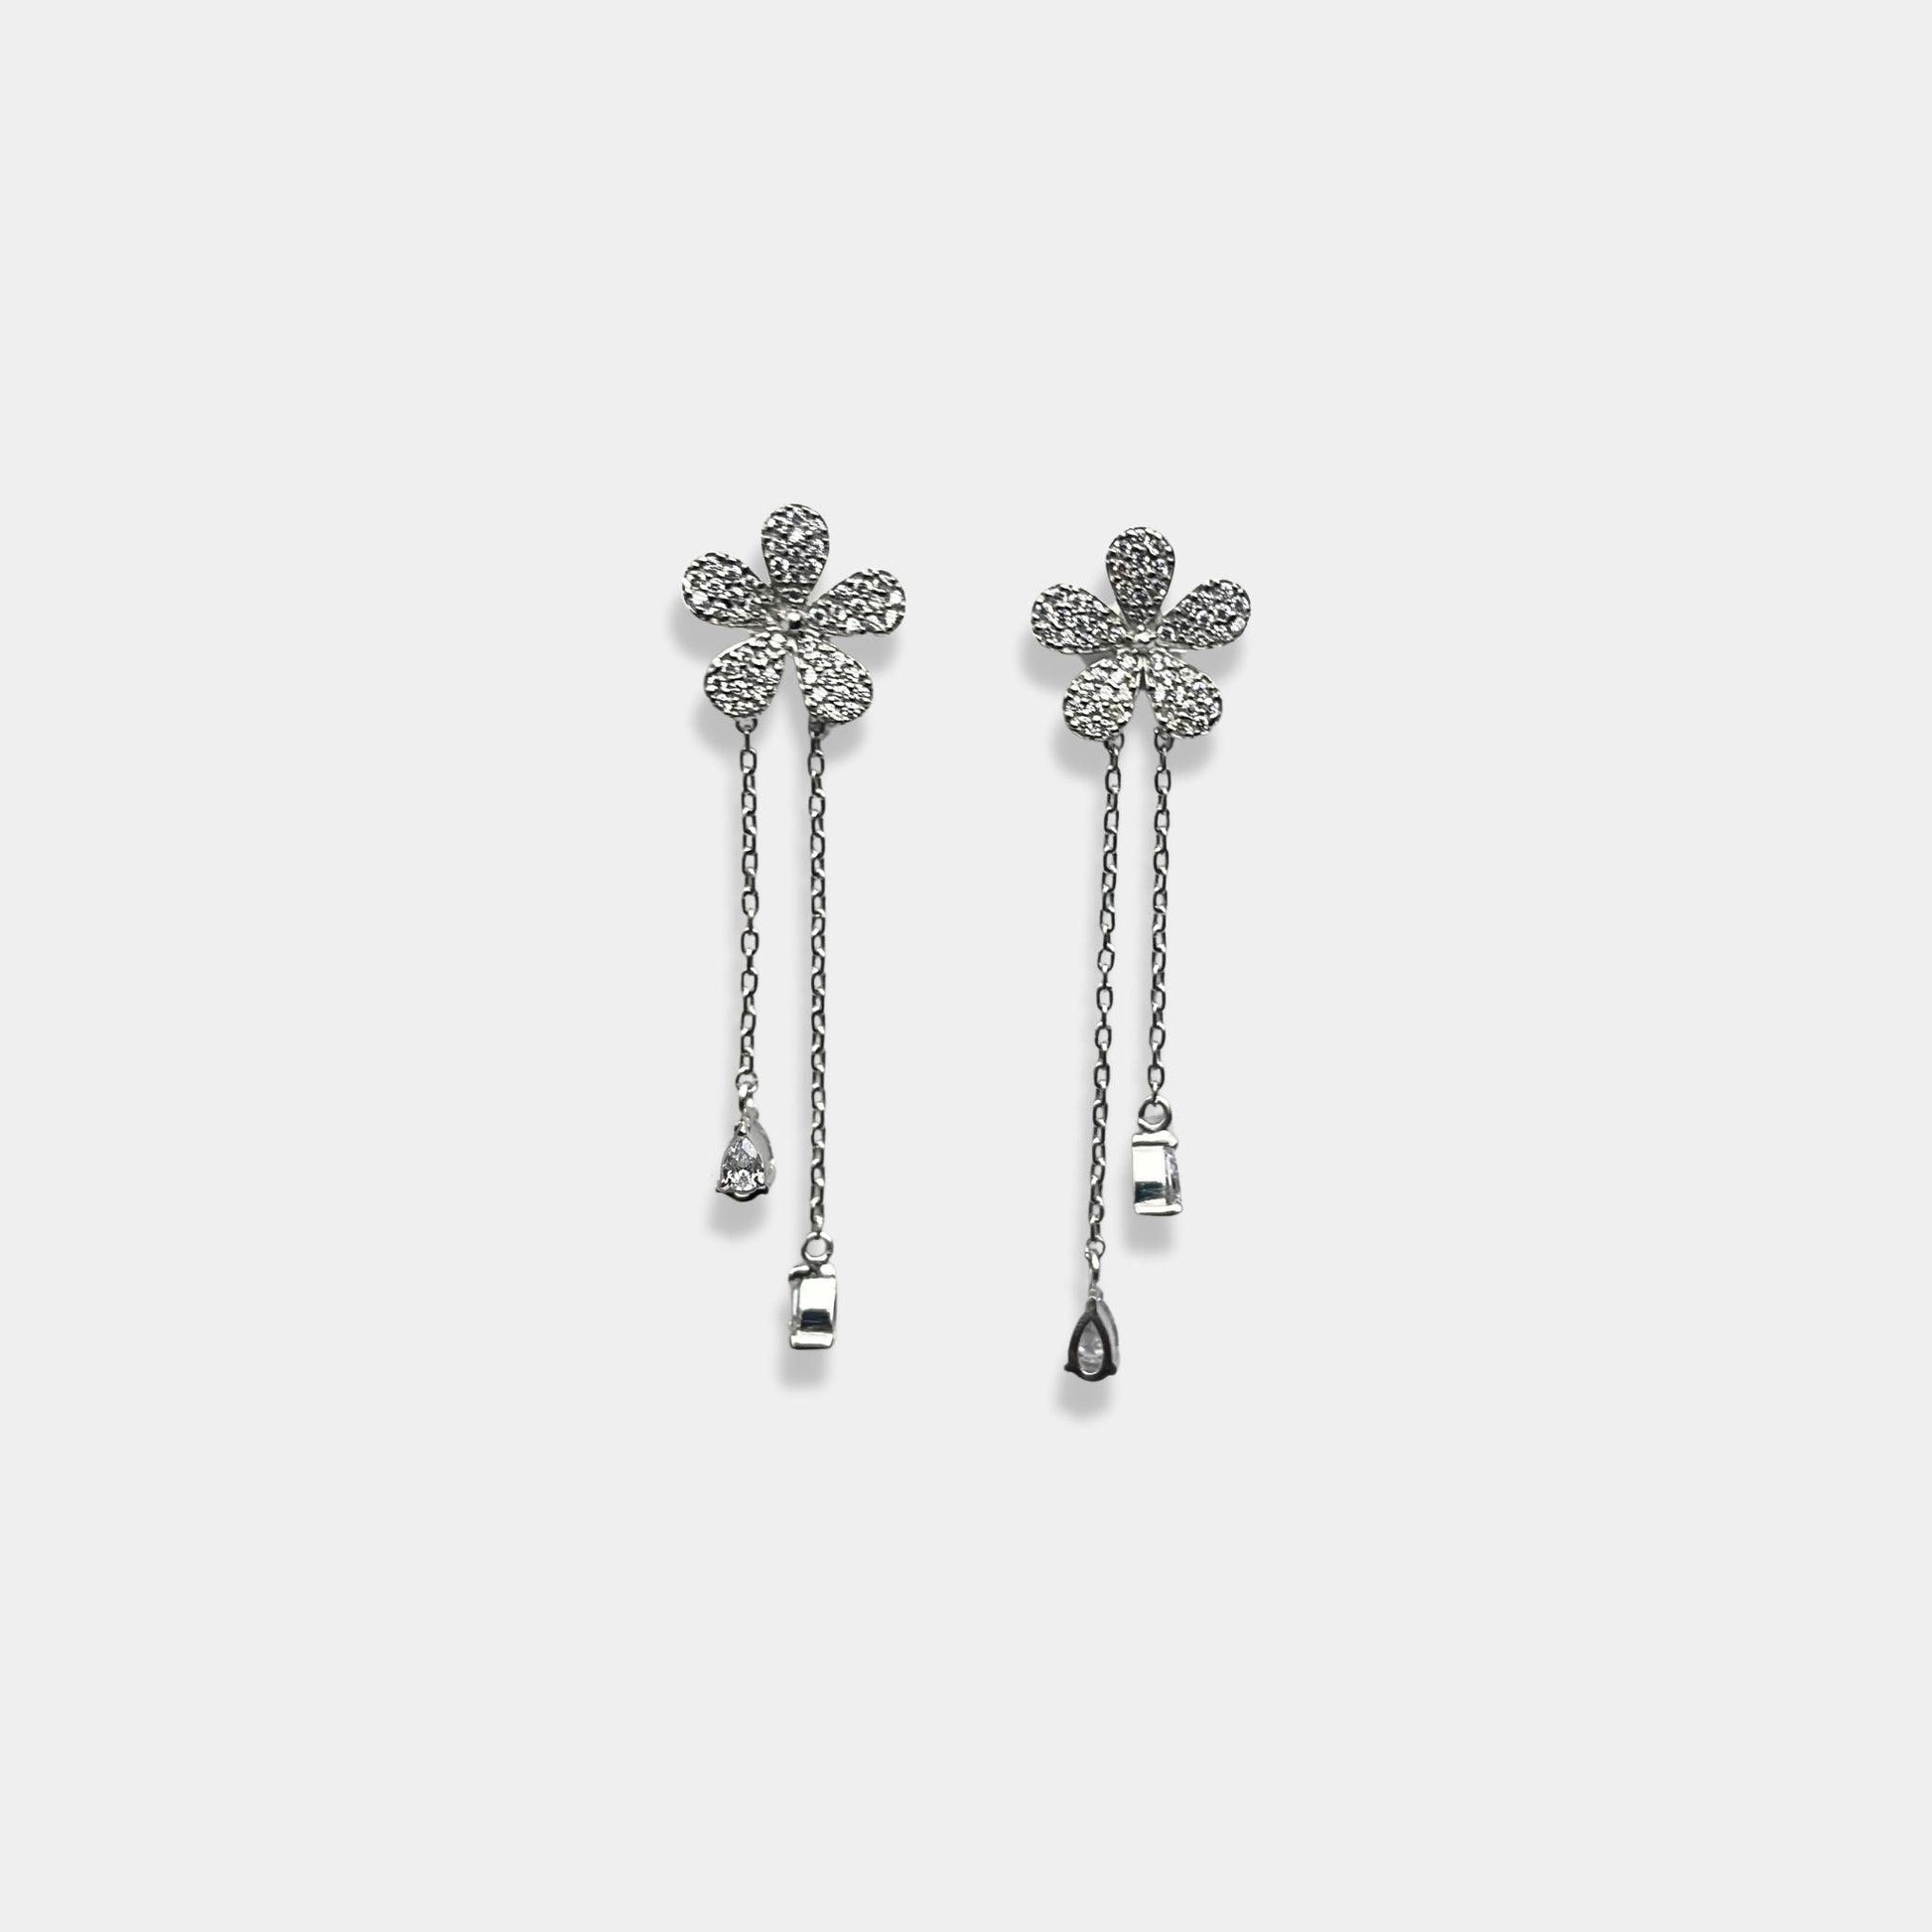 Sterling silver earrings with a beautiful flower pattern, perfect for adding a touch of elegance to any outfit.